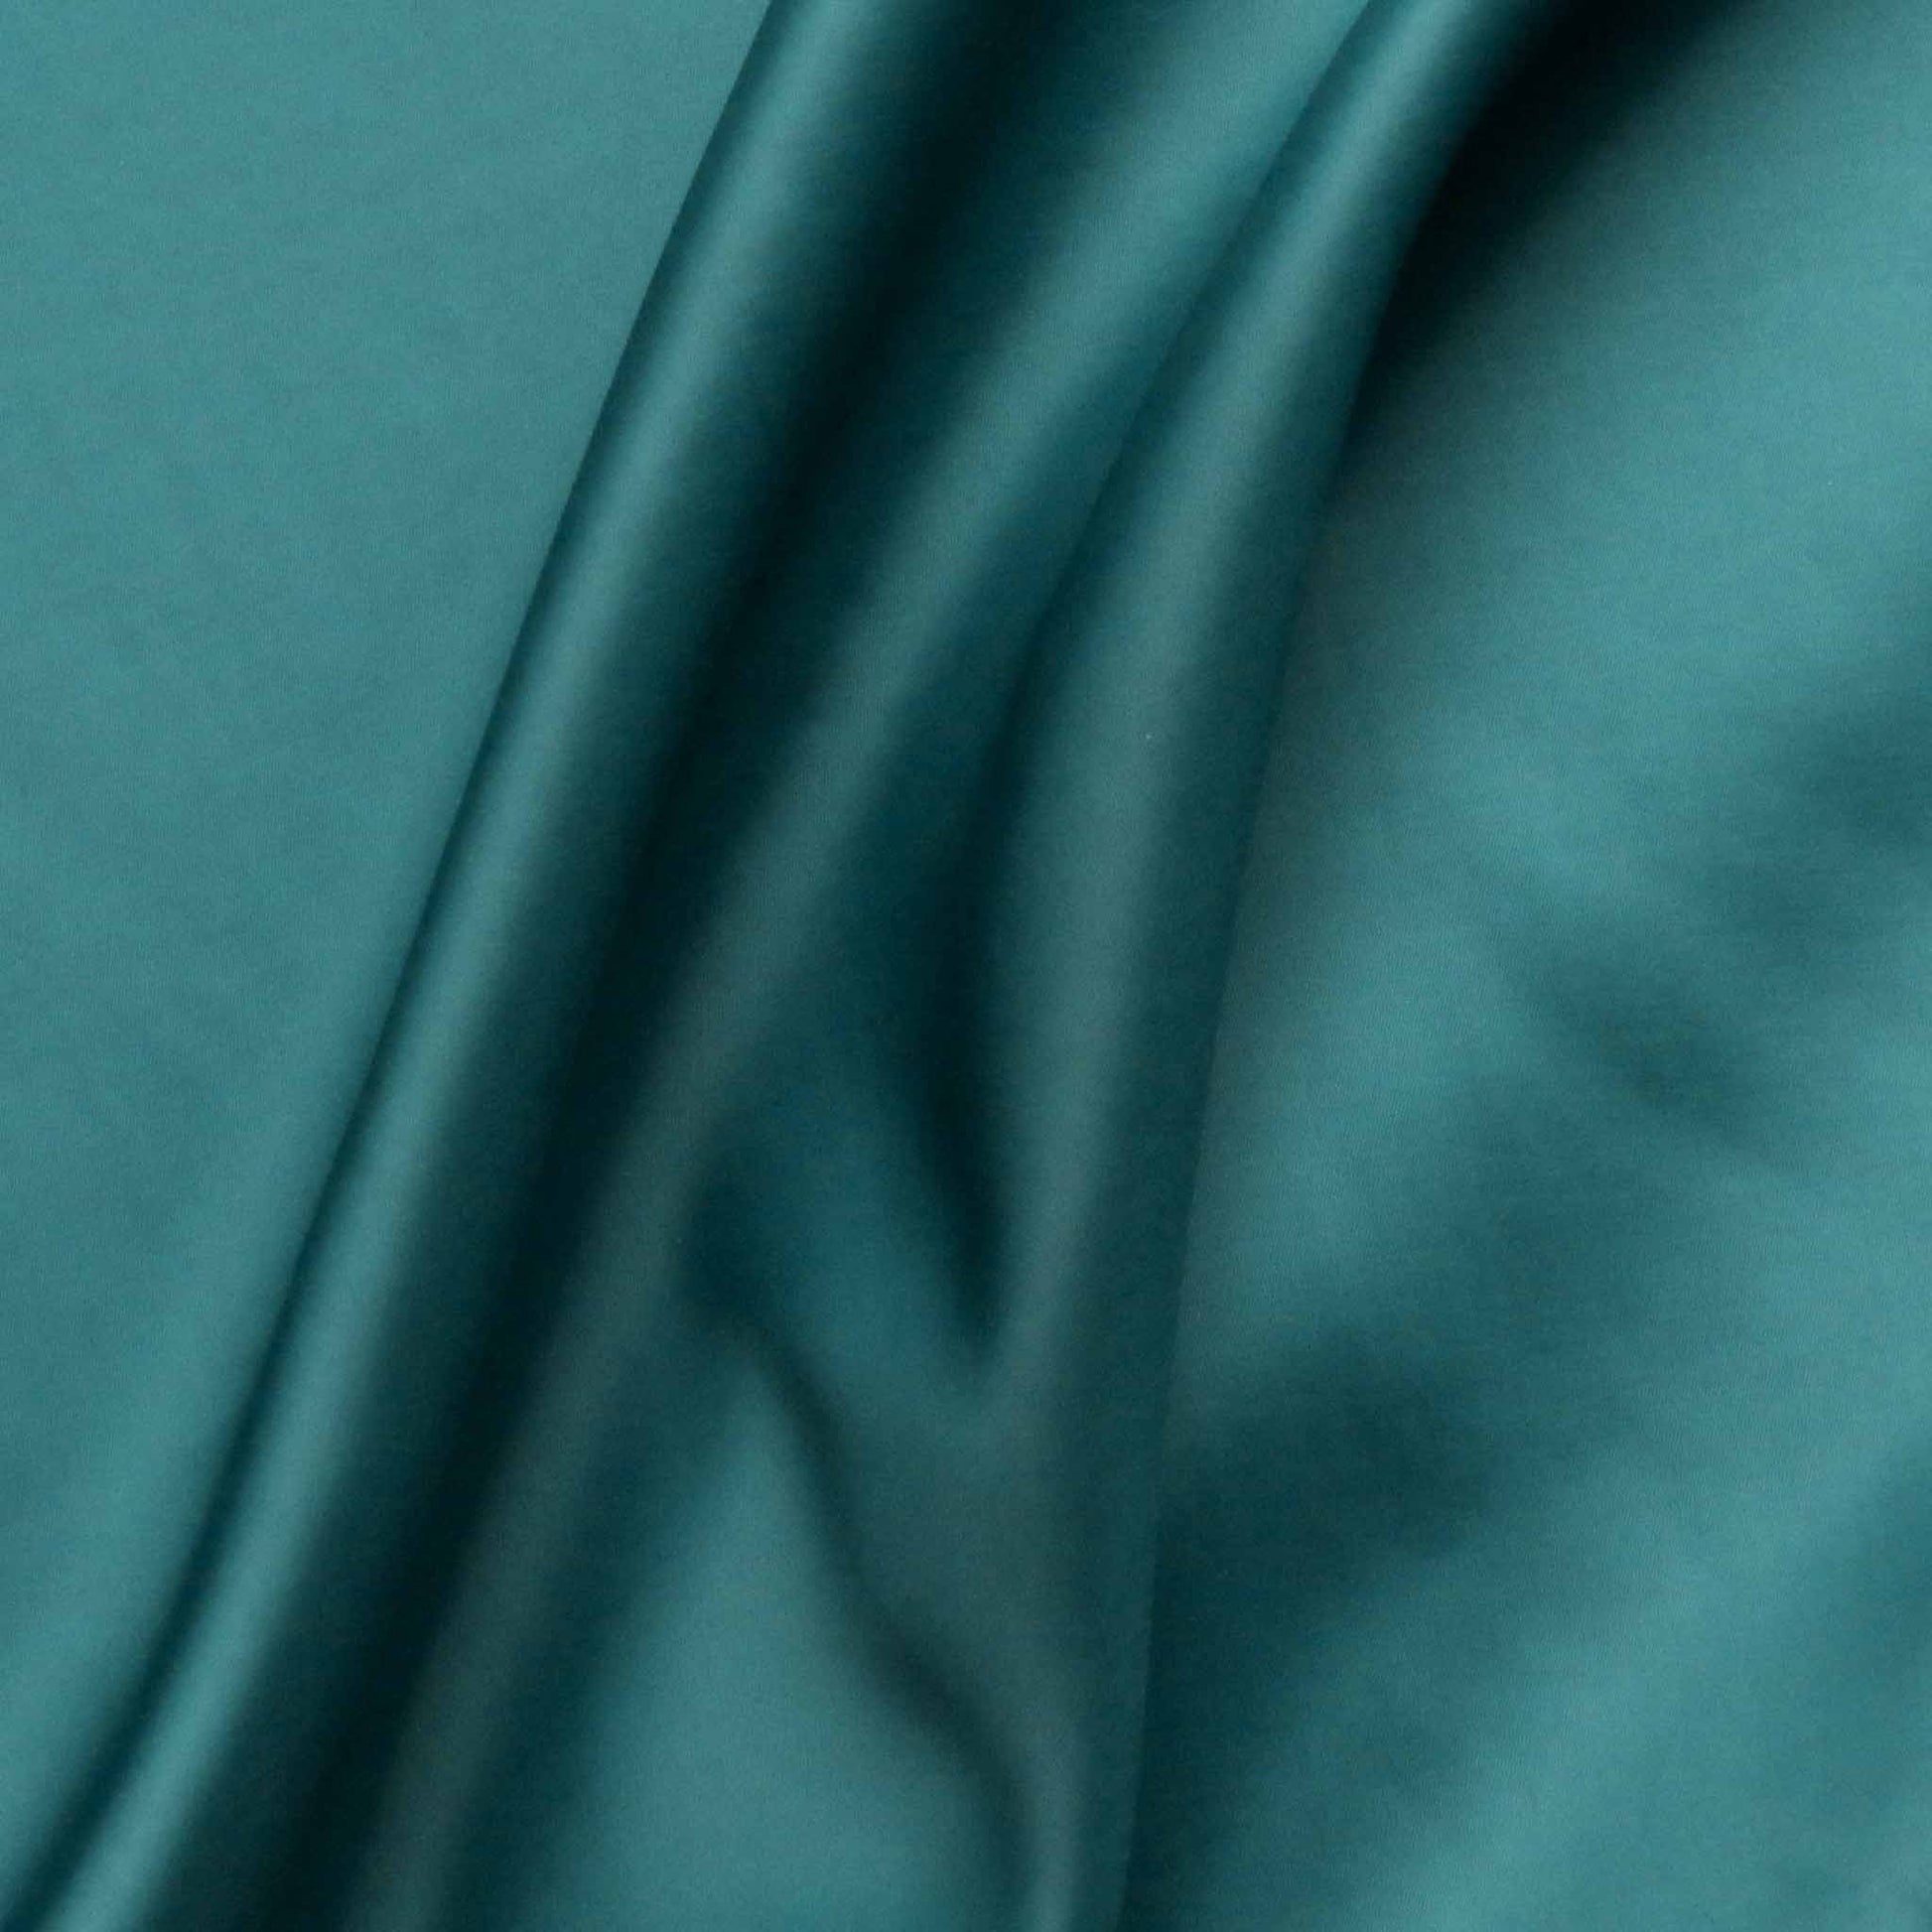 stretchy teal and turquoise lining fabric for dressmaking